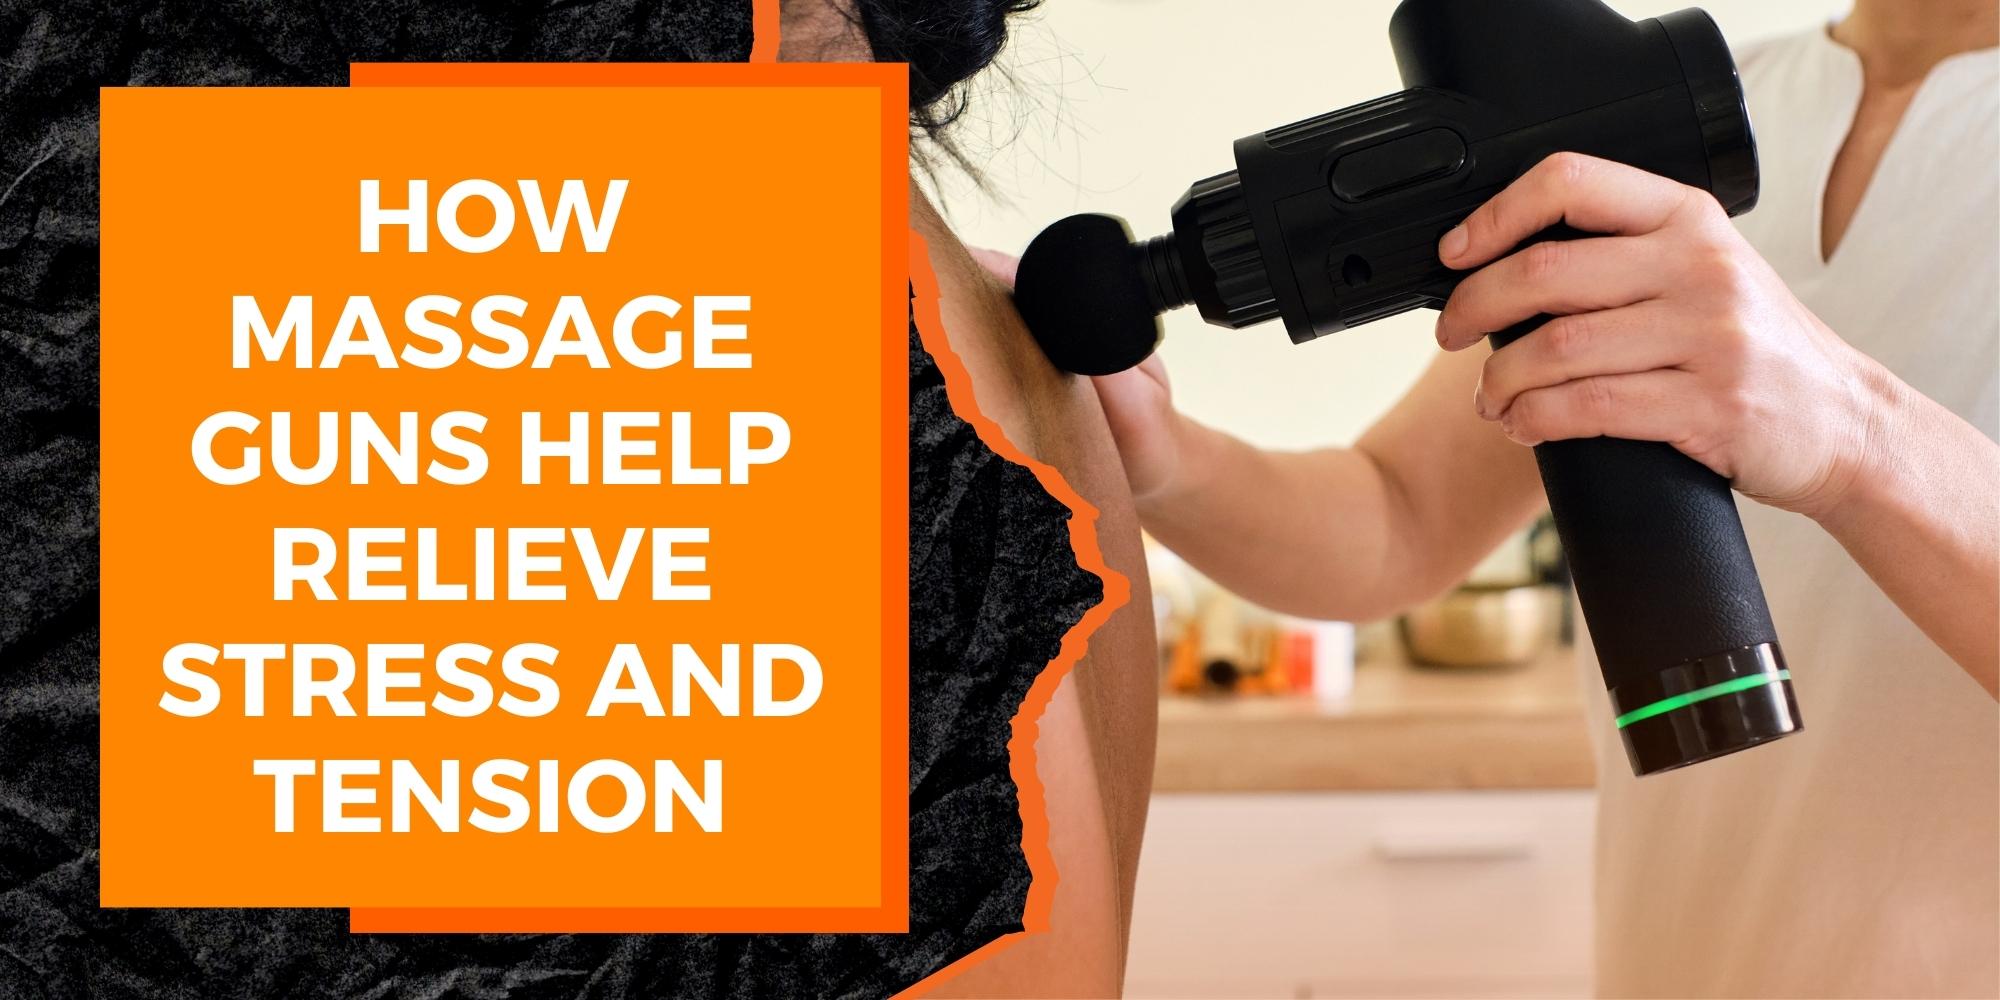 How Massage Guns Help Relieve Stress and Tension